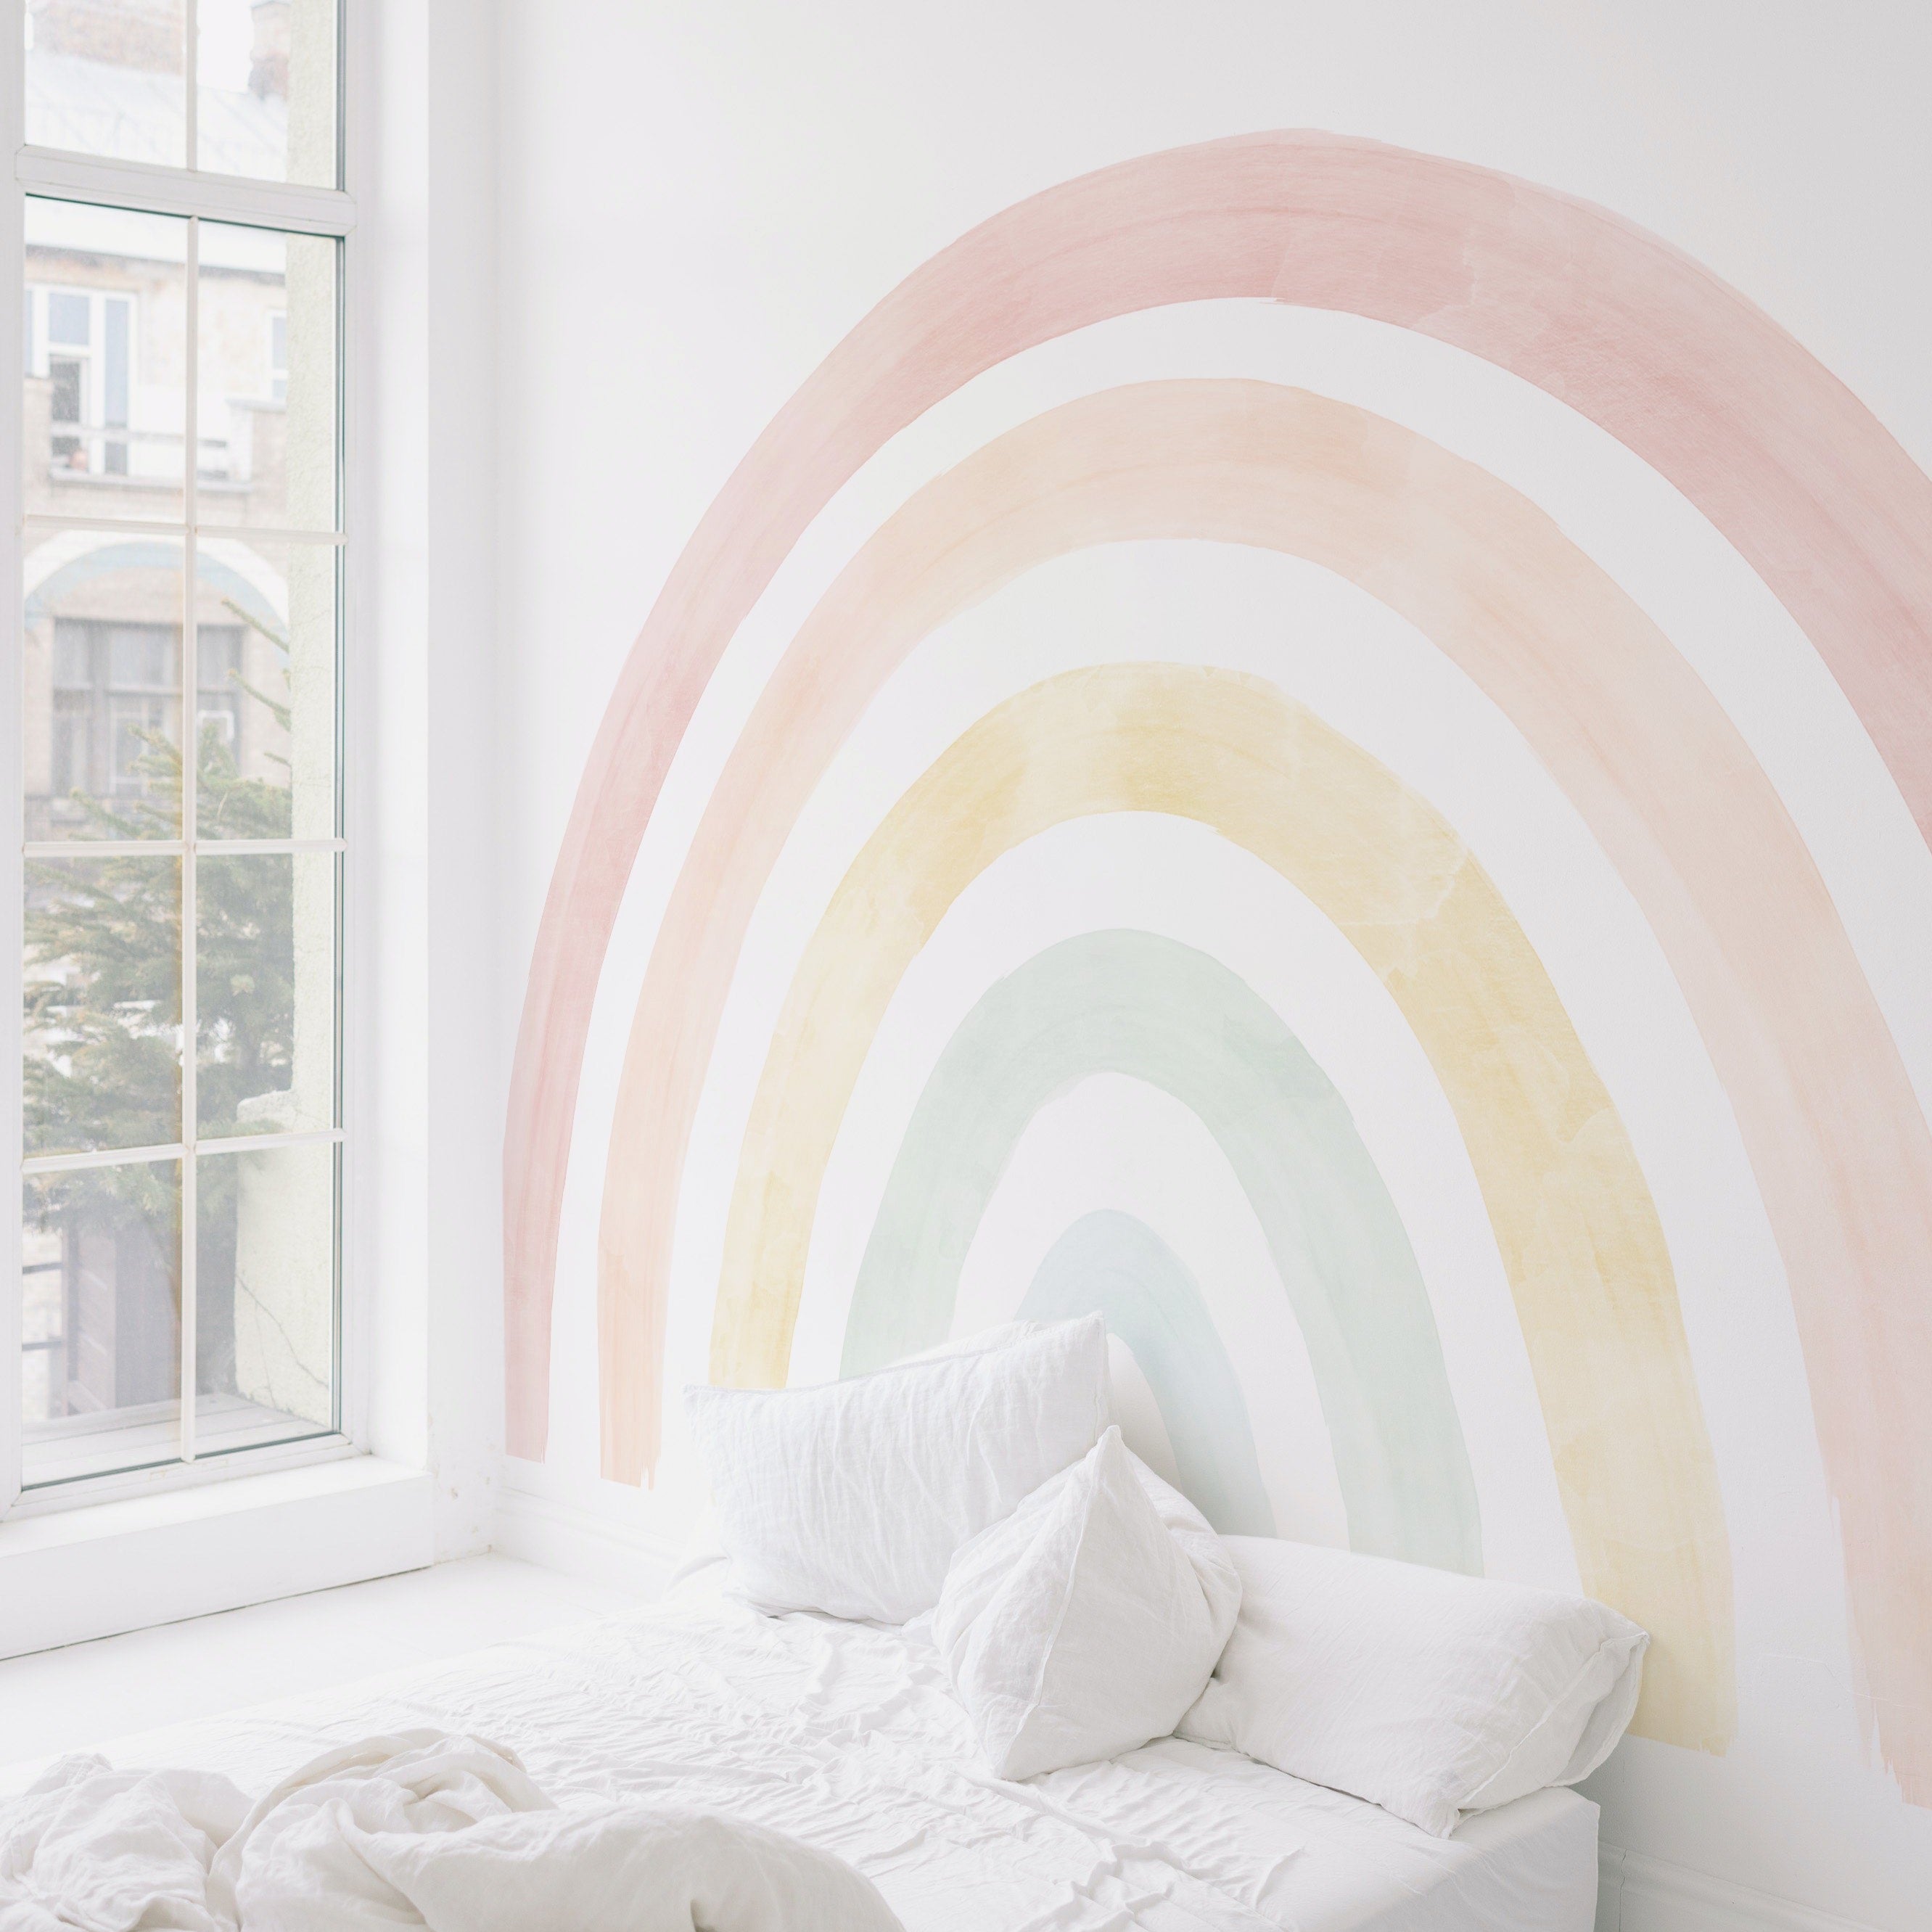 A cozy corner of a room lit by natural light through a large window, with the pastel rainbow mural providing a soothing backdrop to a simple white bed and linens.